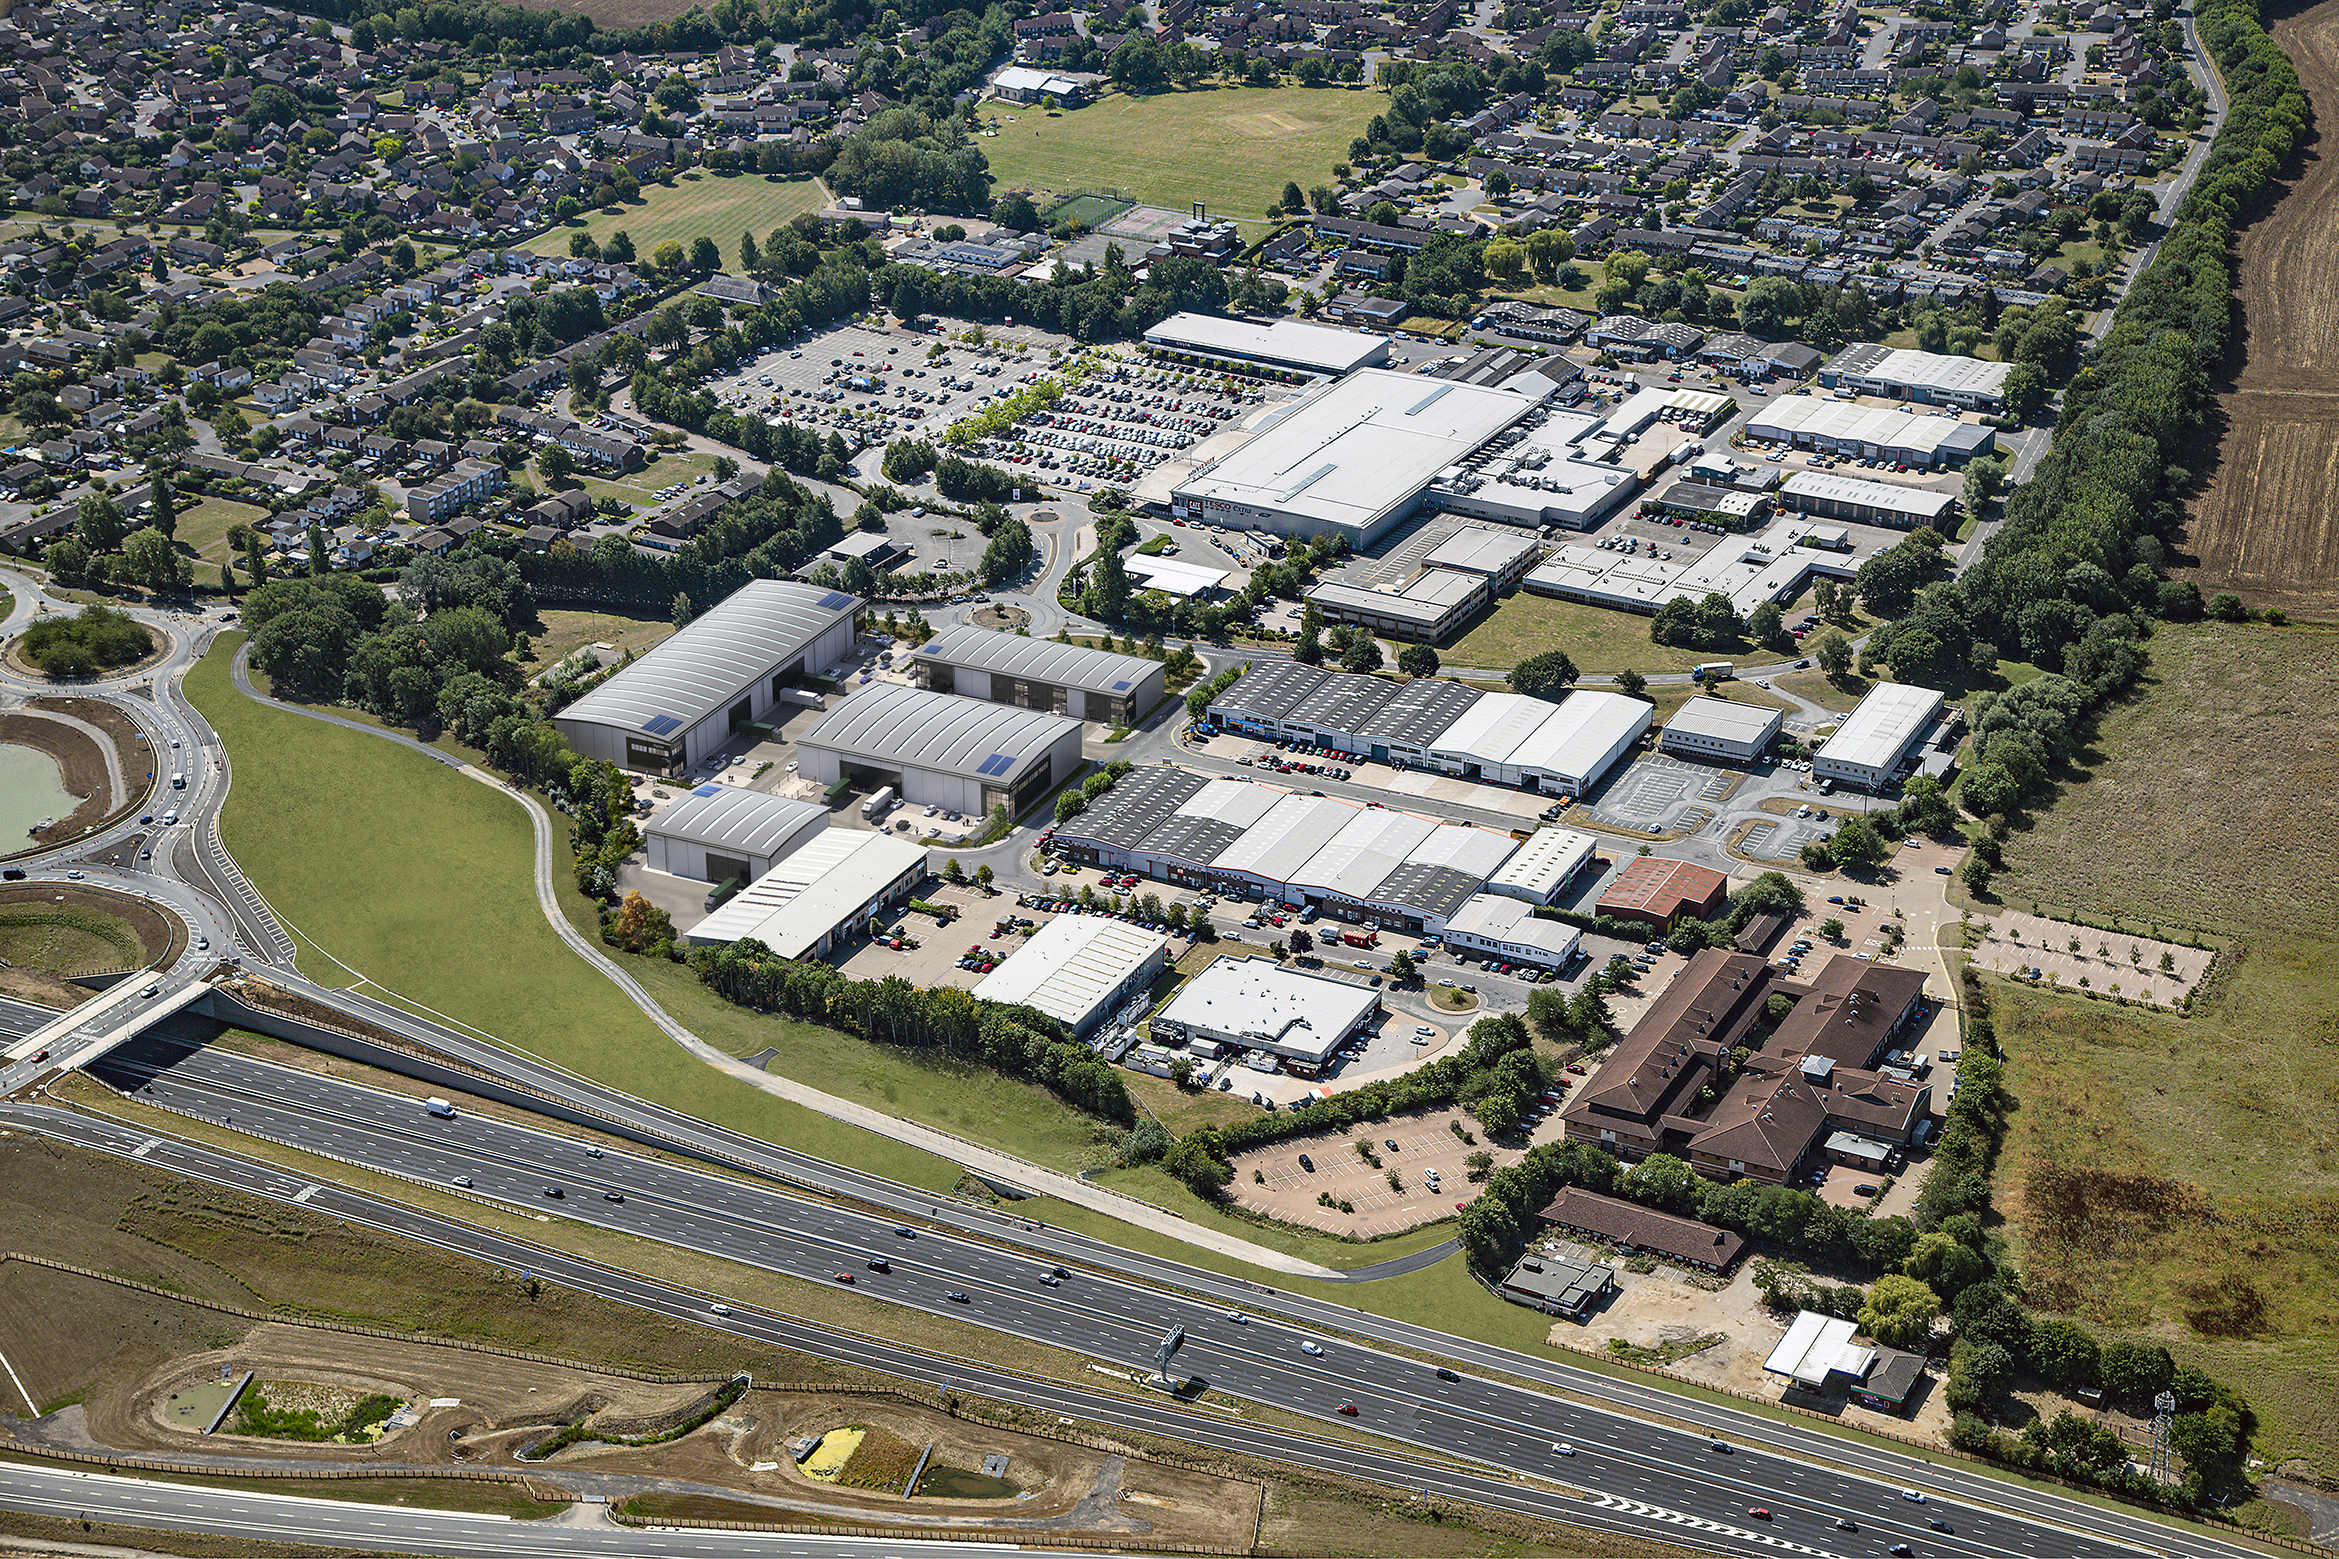 Acquiring an adjacent asset to expand our client’s existing holding and exposure to Cambridge’s high-growth industrial market